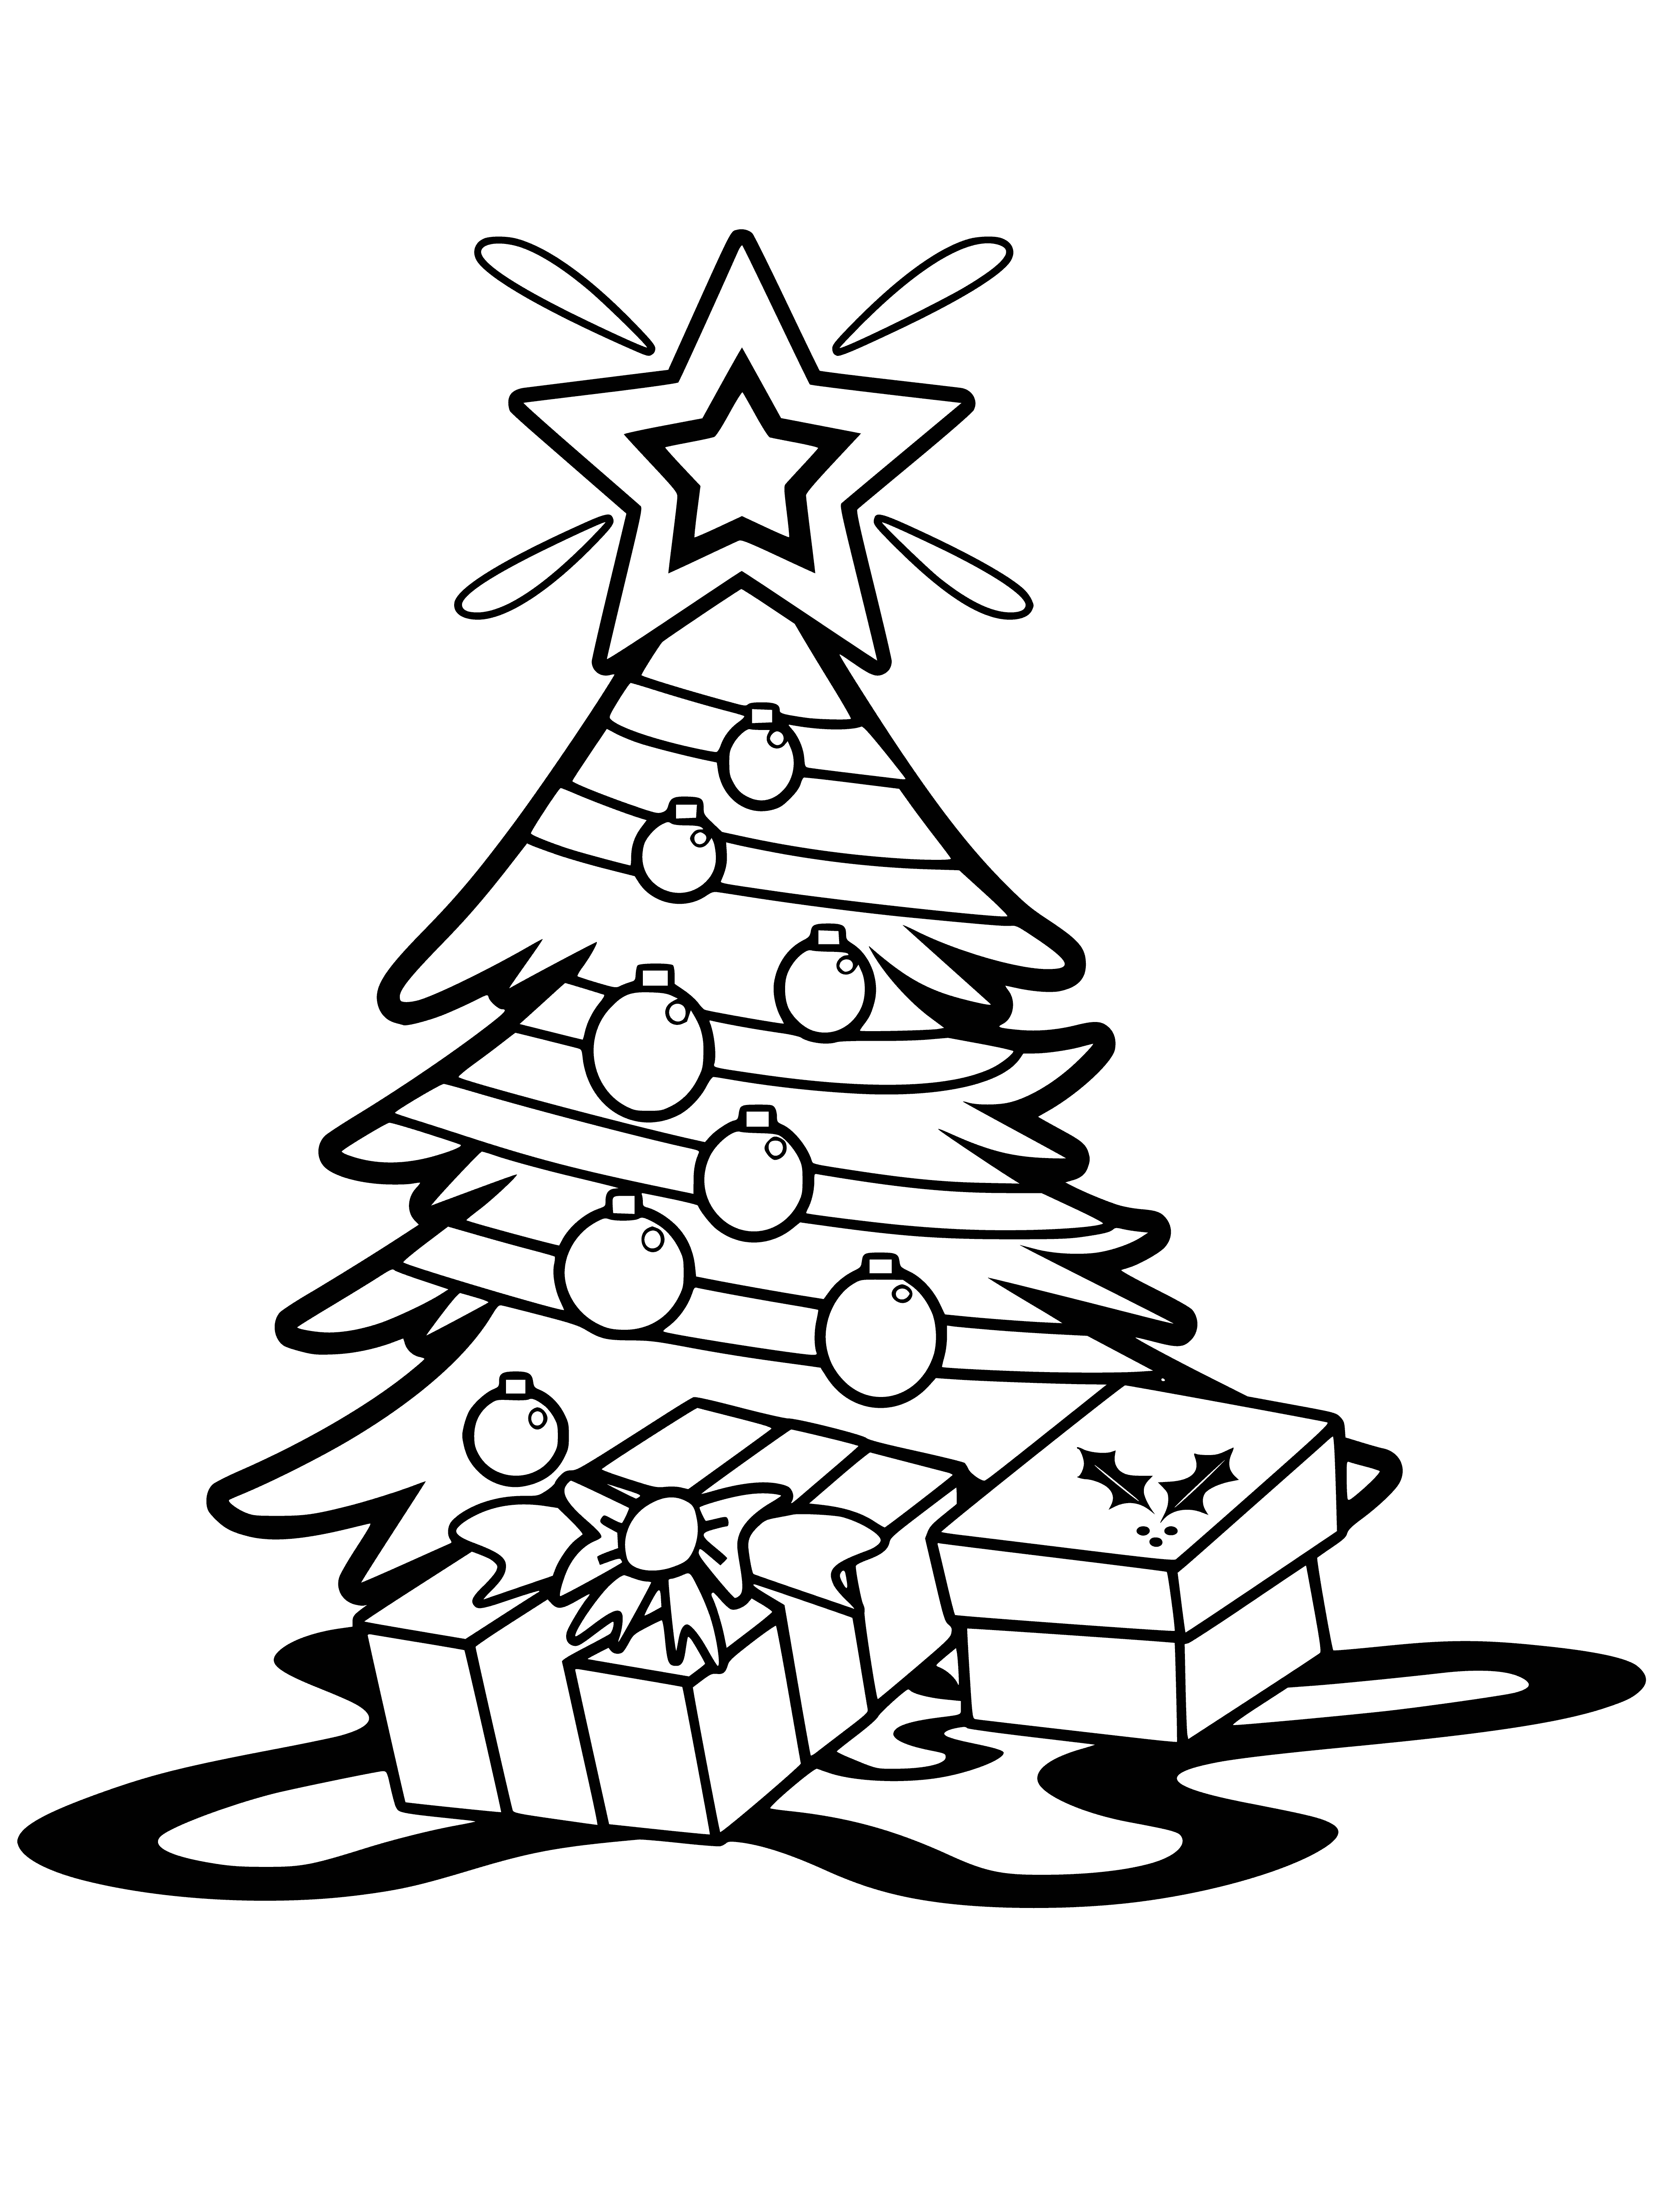 coloring page: A Christmas tree adorned with a star, lights, and orbs, the star shining brightly. #Christmas #Tree